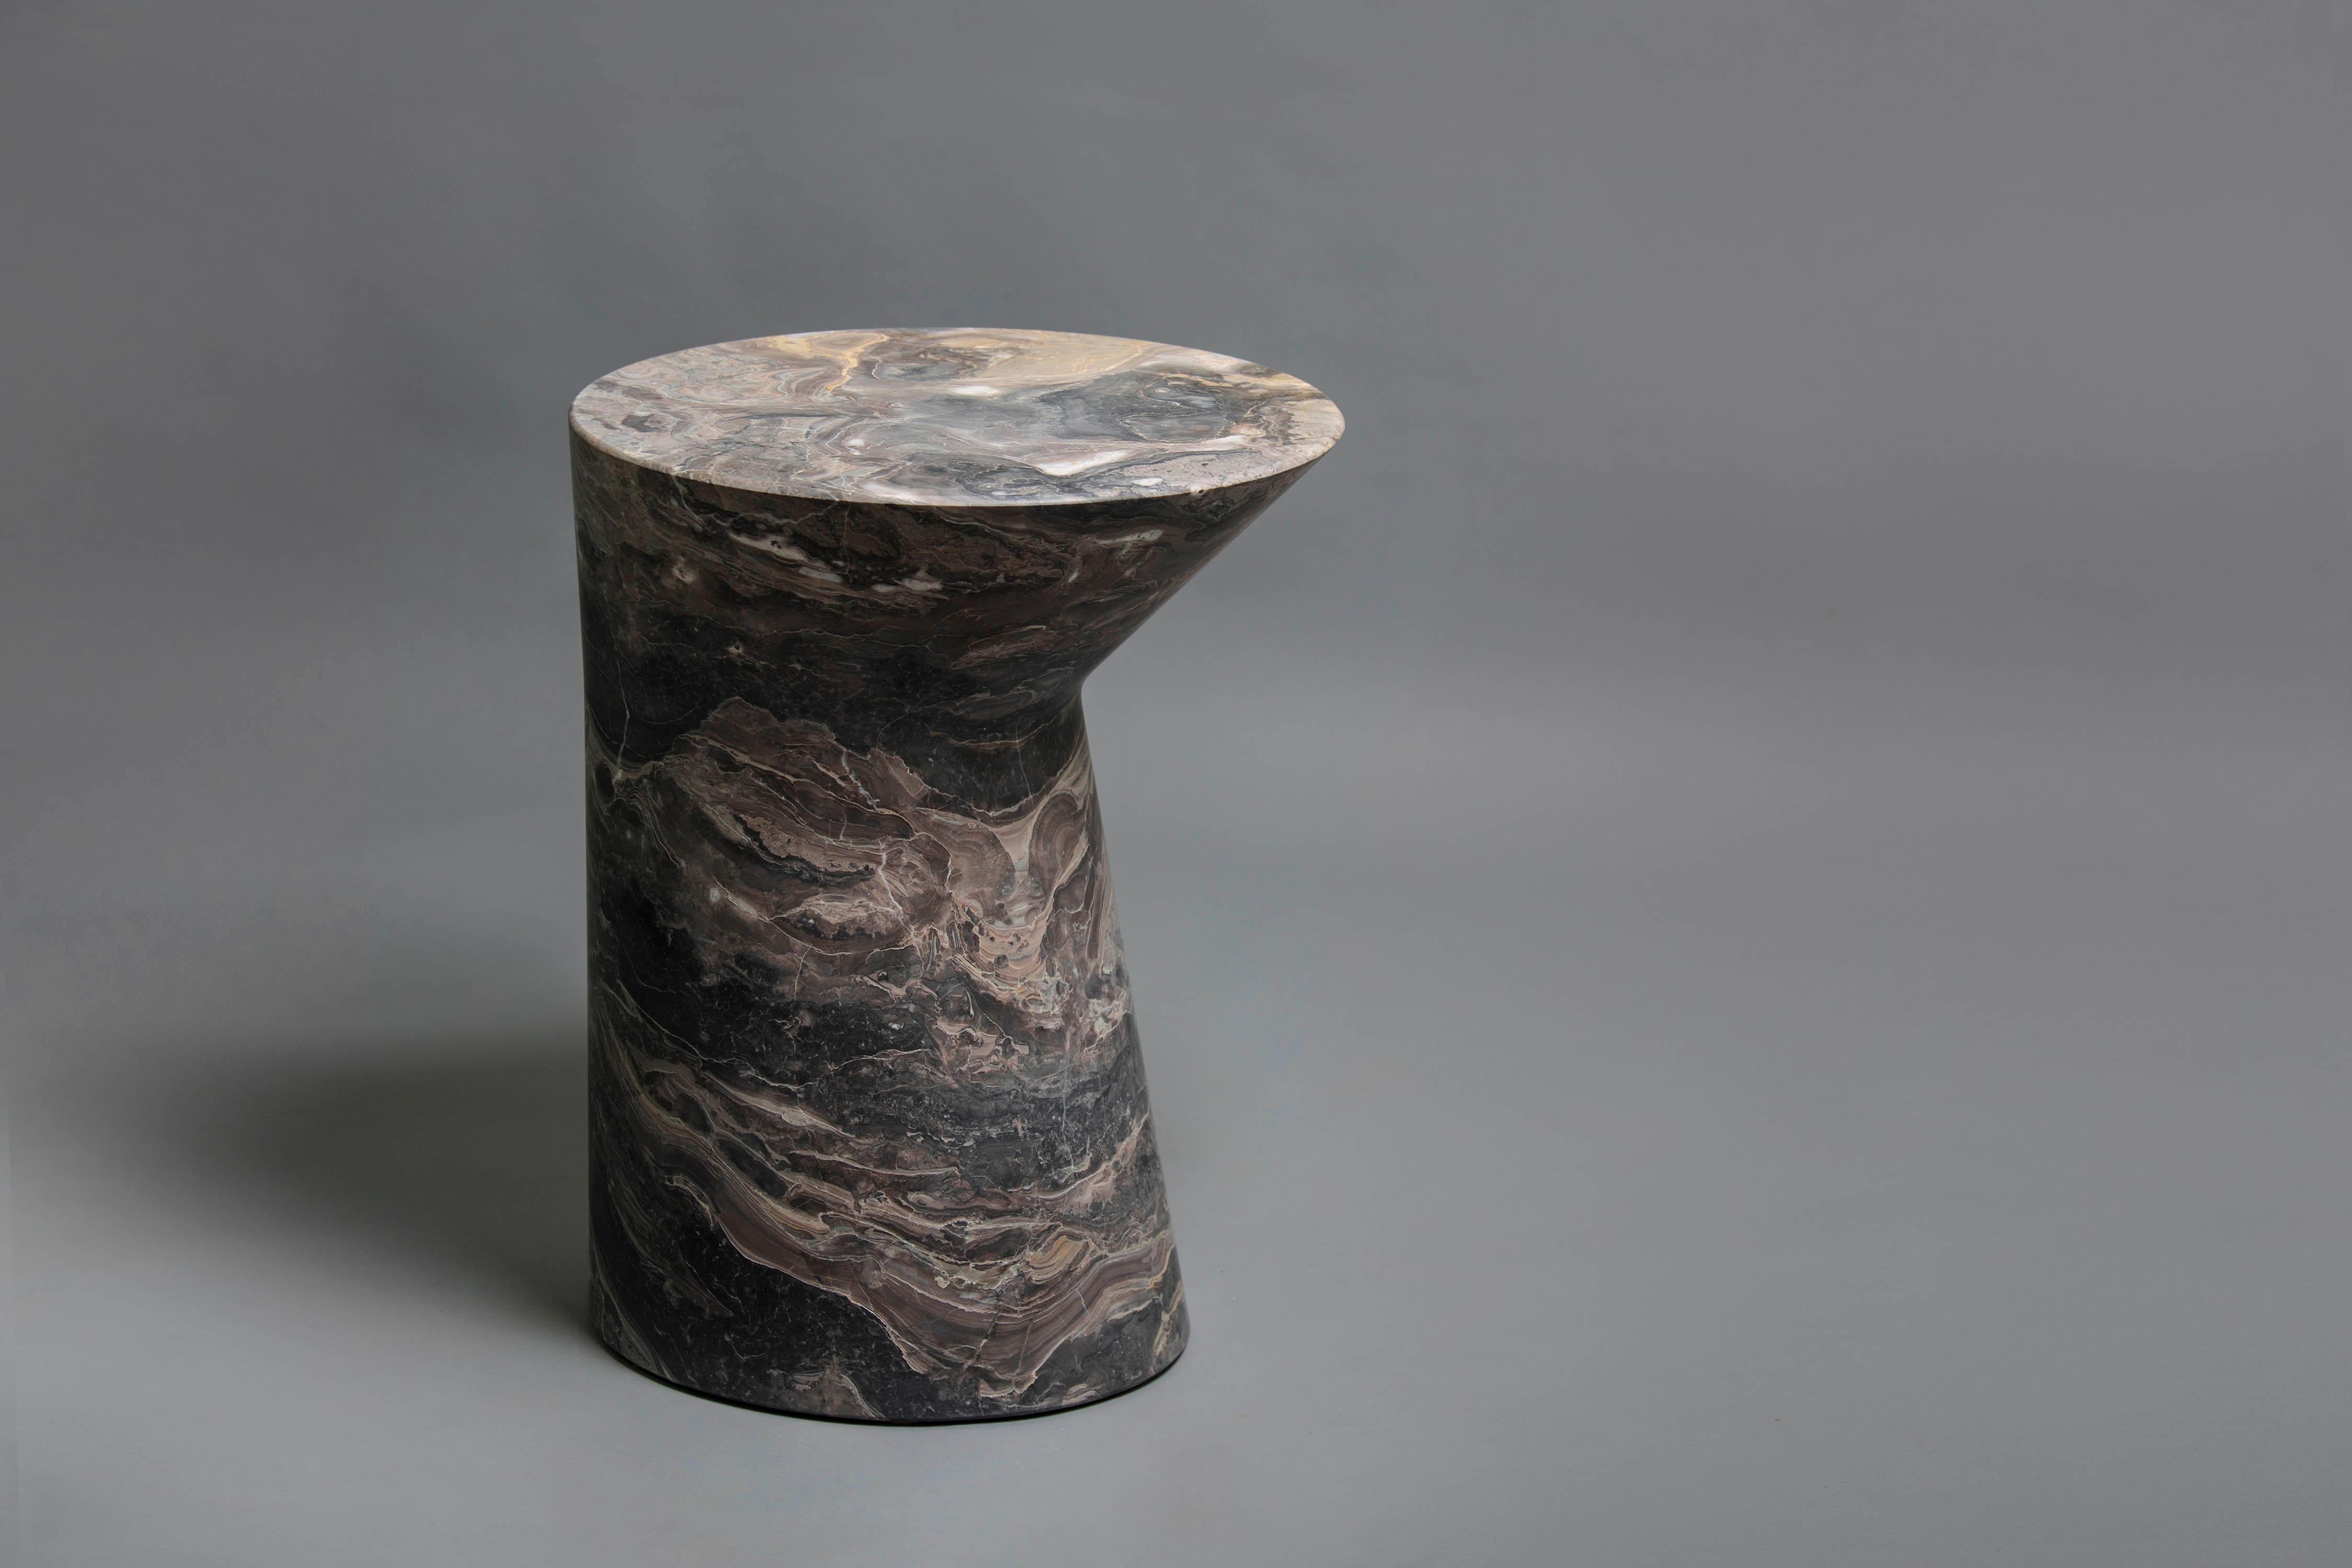 Io Side table in Italian, Orobico marble.

Named after Jupiter’s moon, and much like the moon’s silhouette appearing different each day of the month
Io’s minimal gesture gives the table a new appearance when viewing ti from different angles.
Cut